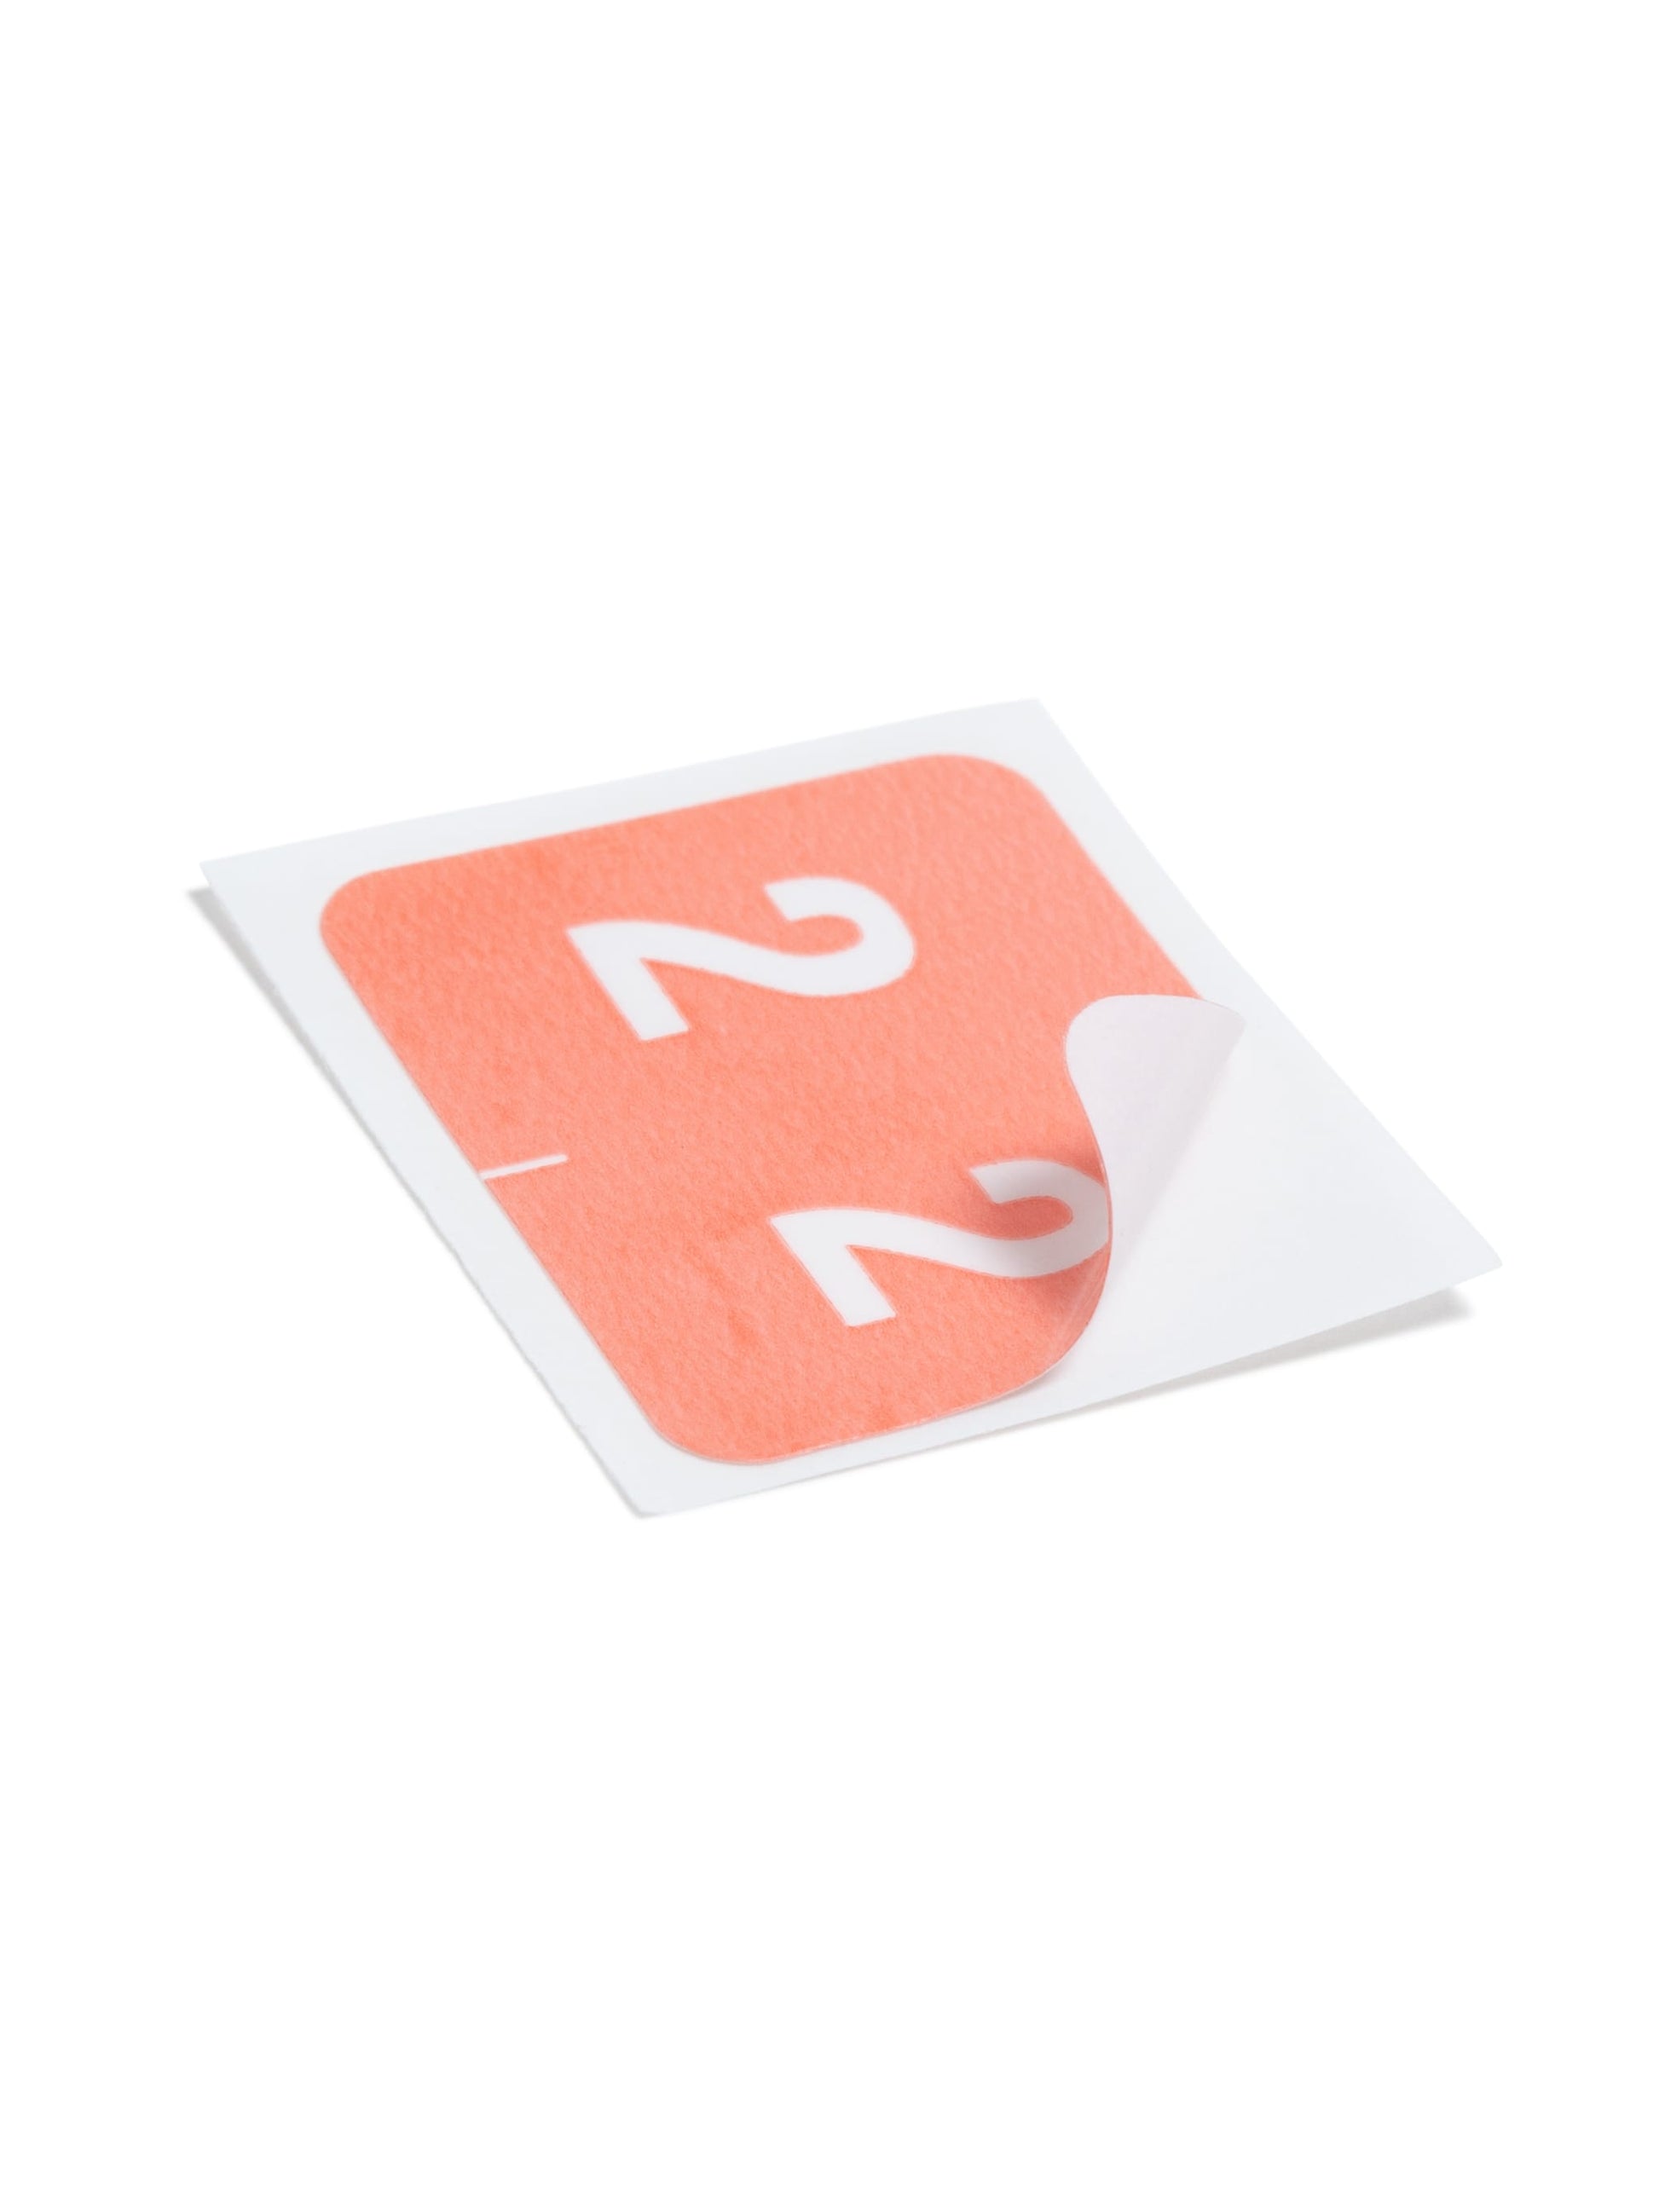 DCCRN Color-Coded Numeric Labels - Rolls, Pink Color, 1-1/4" X 1" Size, Set of 1, 086486673426